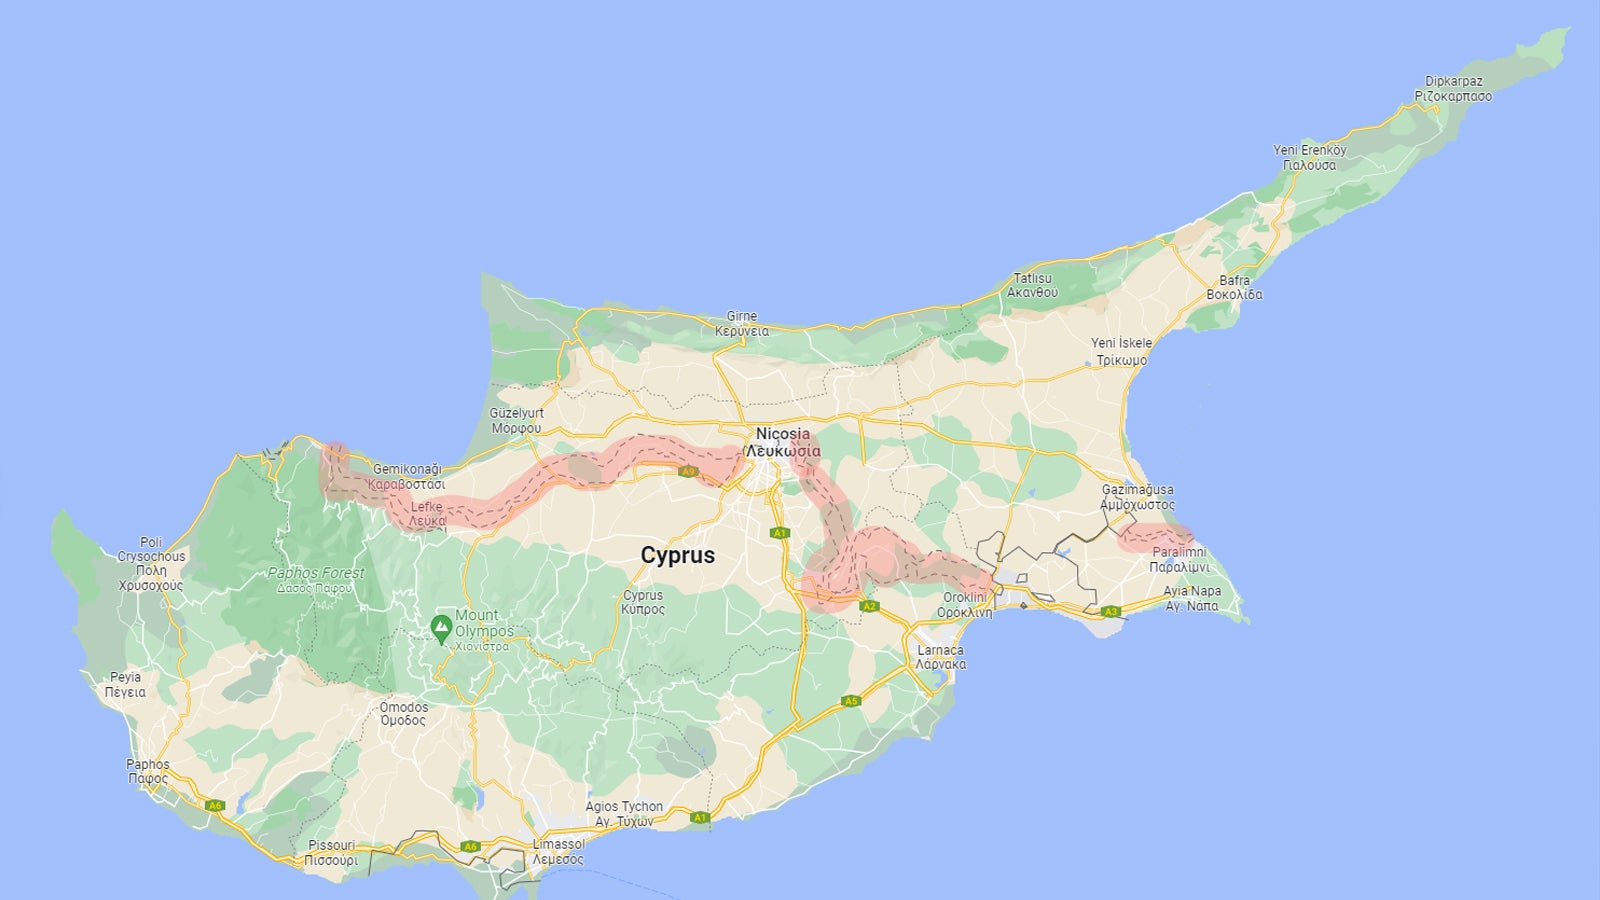 Cyprus's UN buffer zone, highlighted in red.